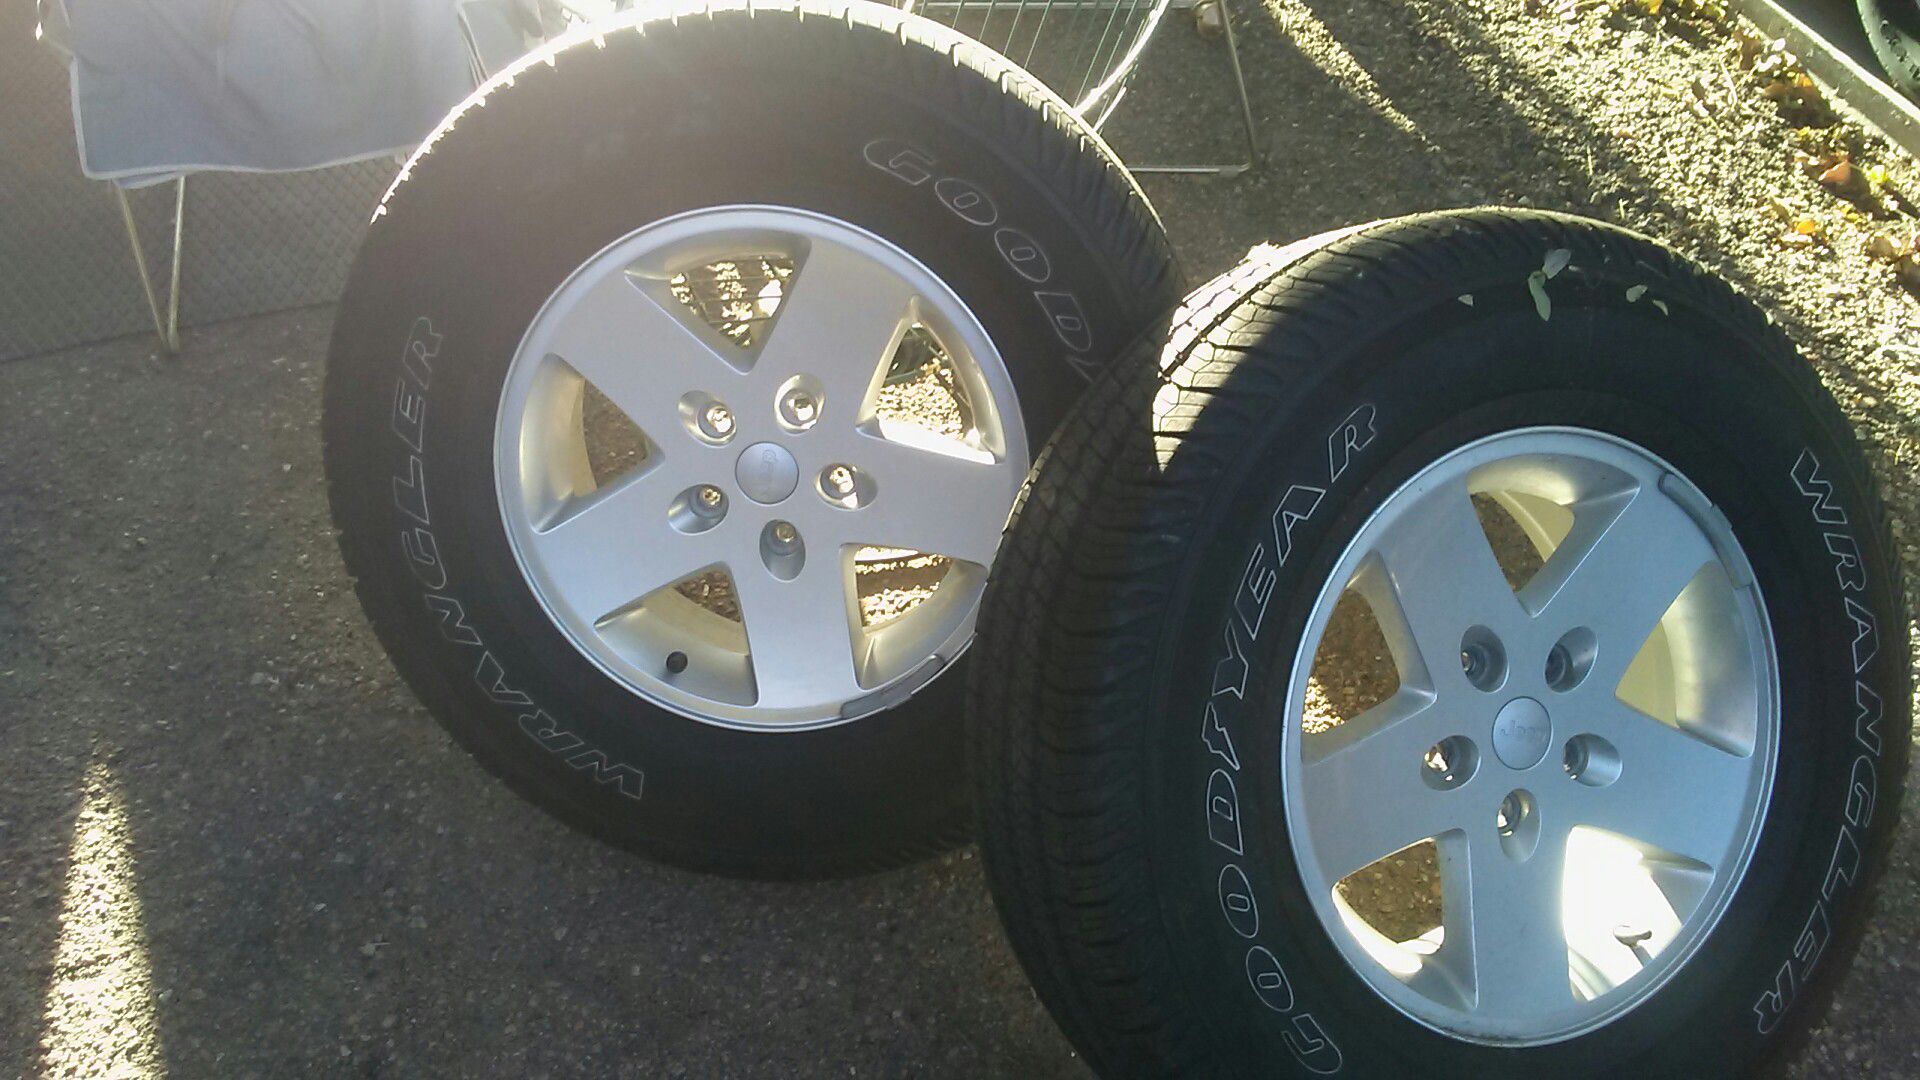 I have 5 tires and wheels p225/75/r / 17 that are off of a late model Jeep Wrangler four are in great shape one is brand new